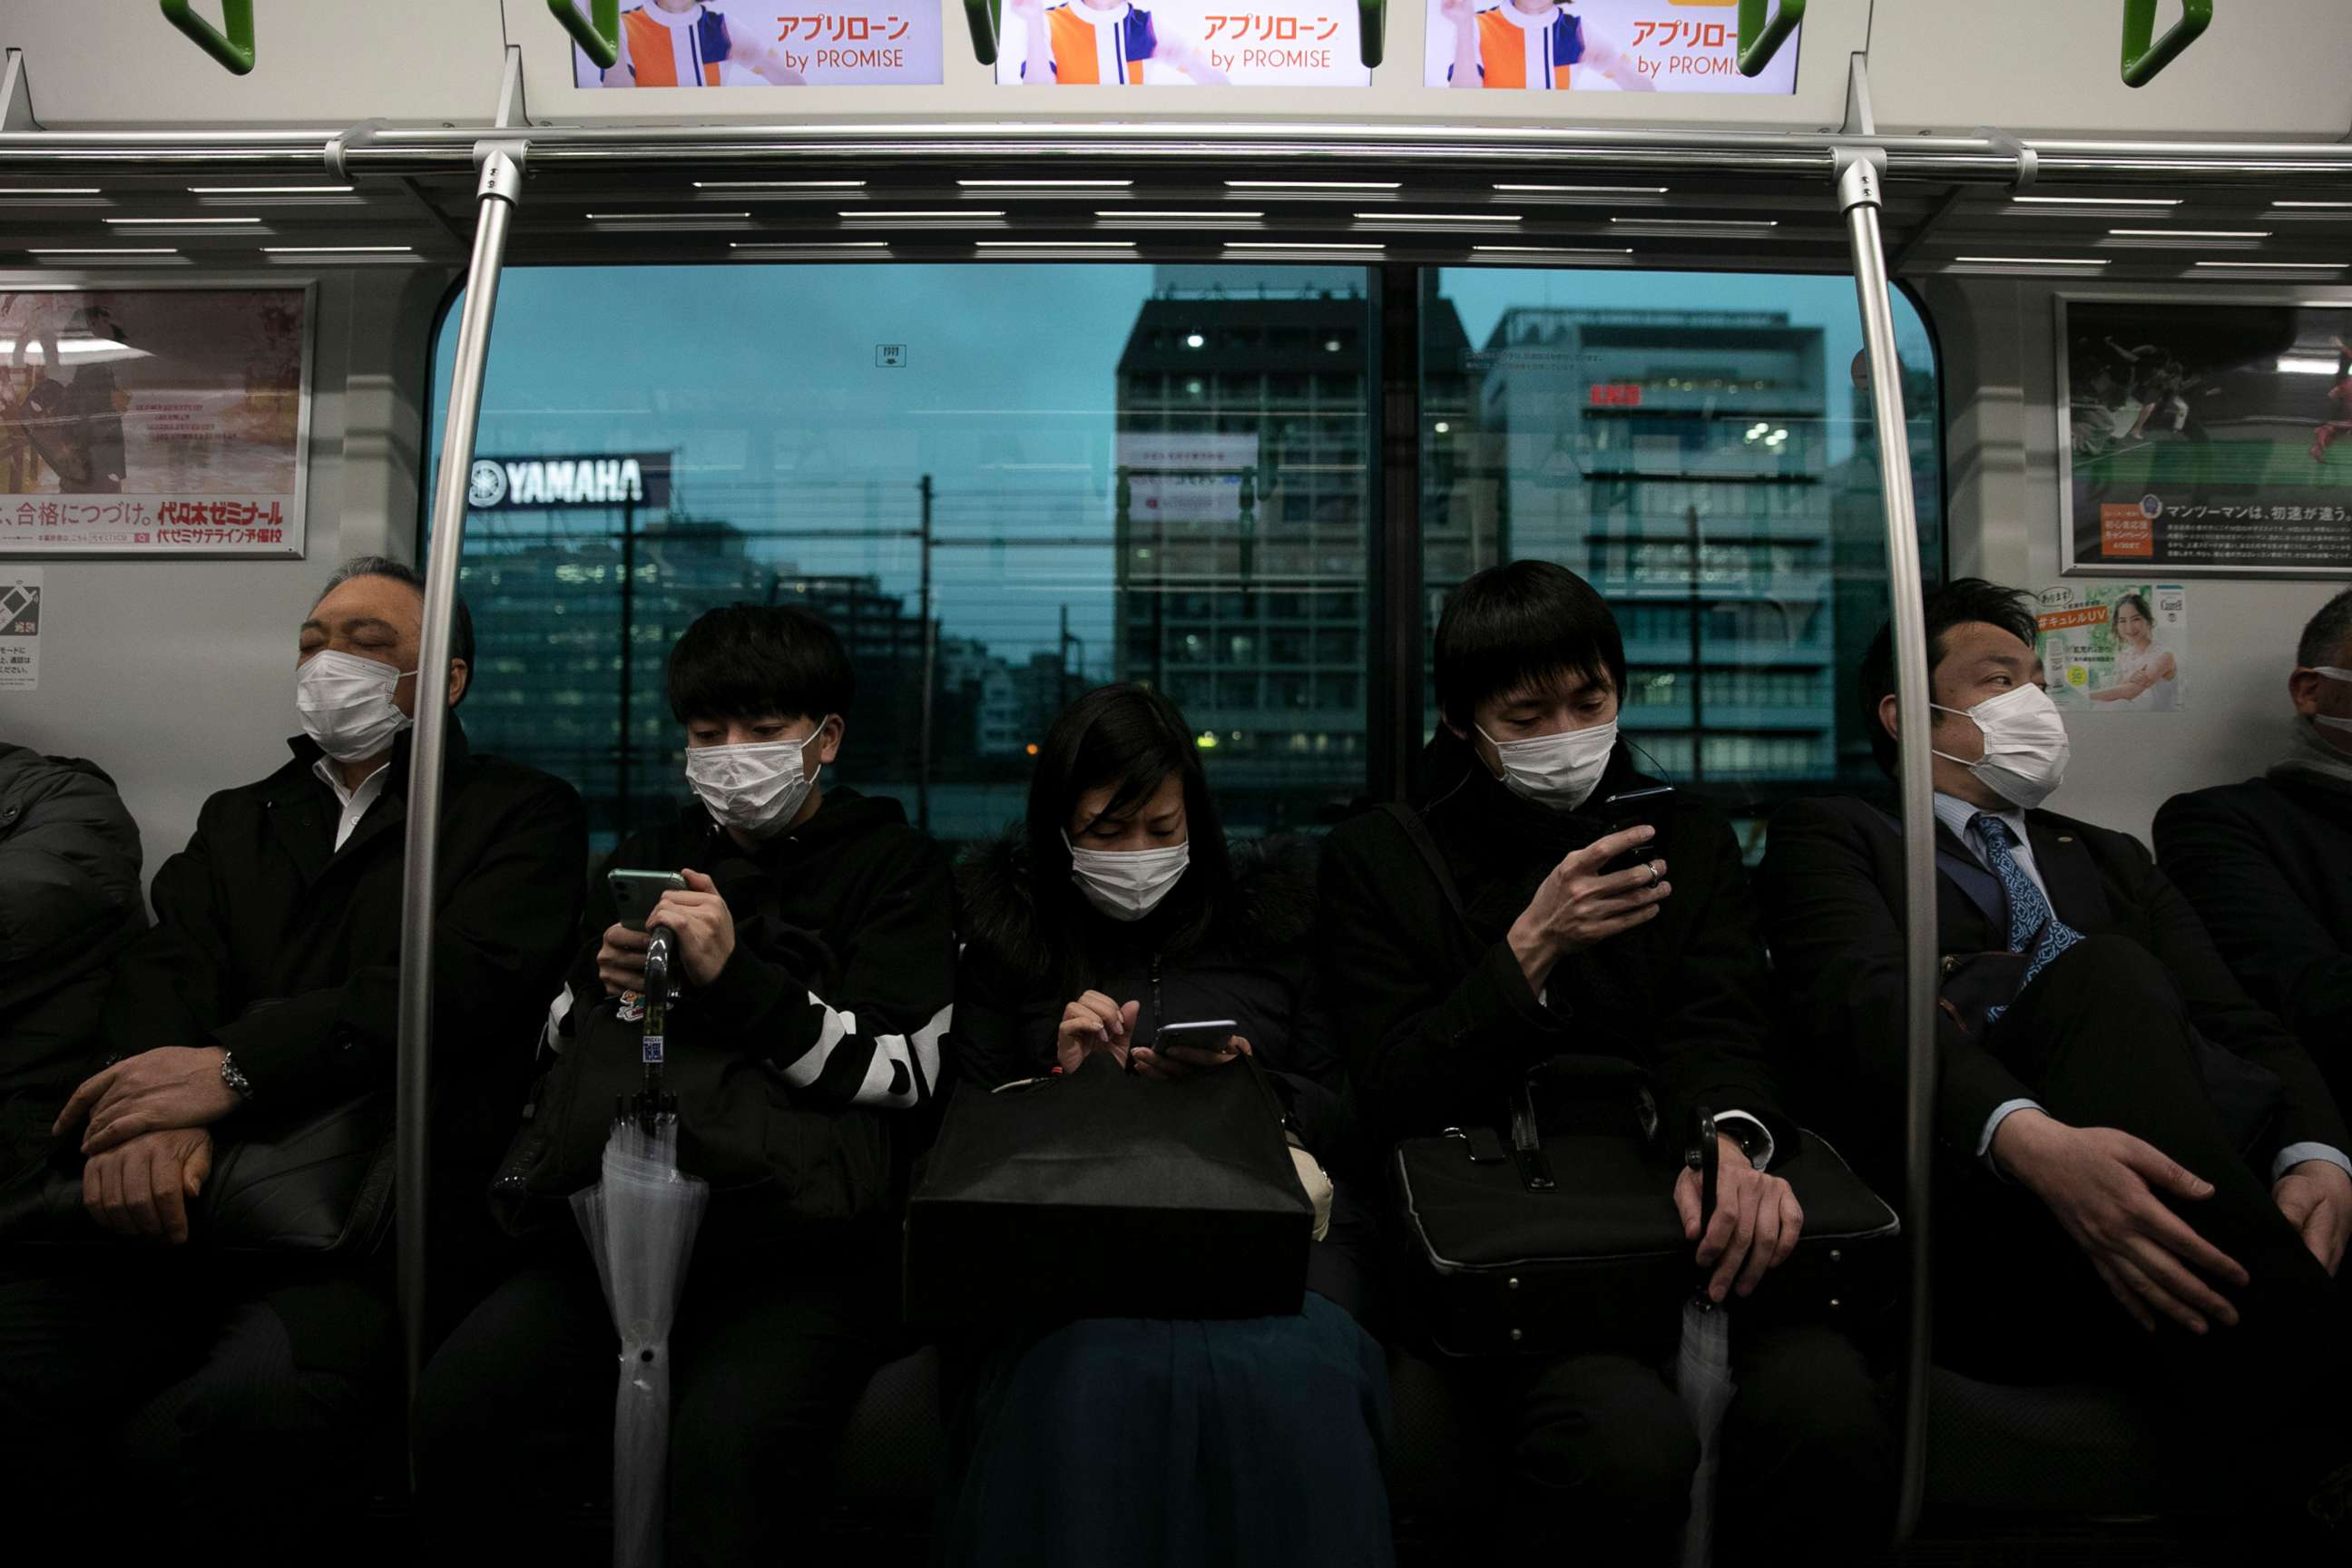 PHOTO: Commuters wearing masks sit on a train in Tokyo, March 2, 2020.